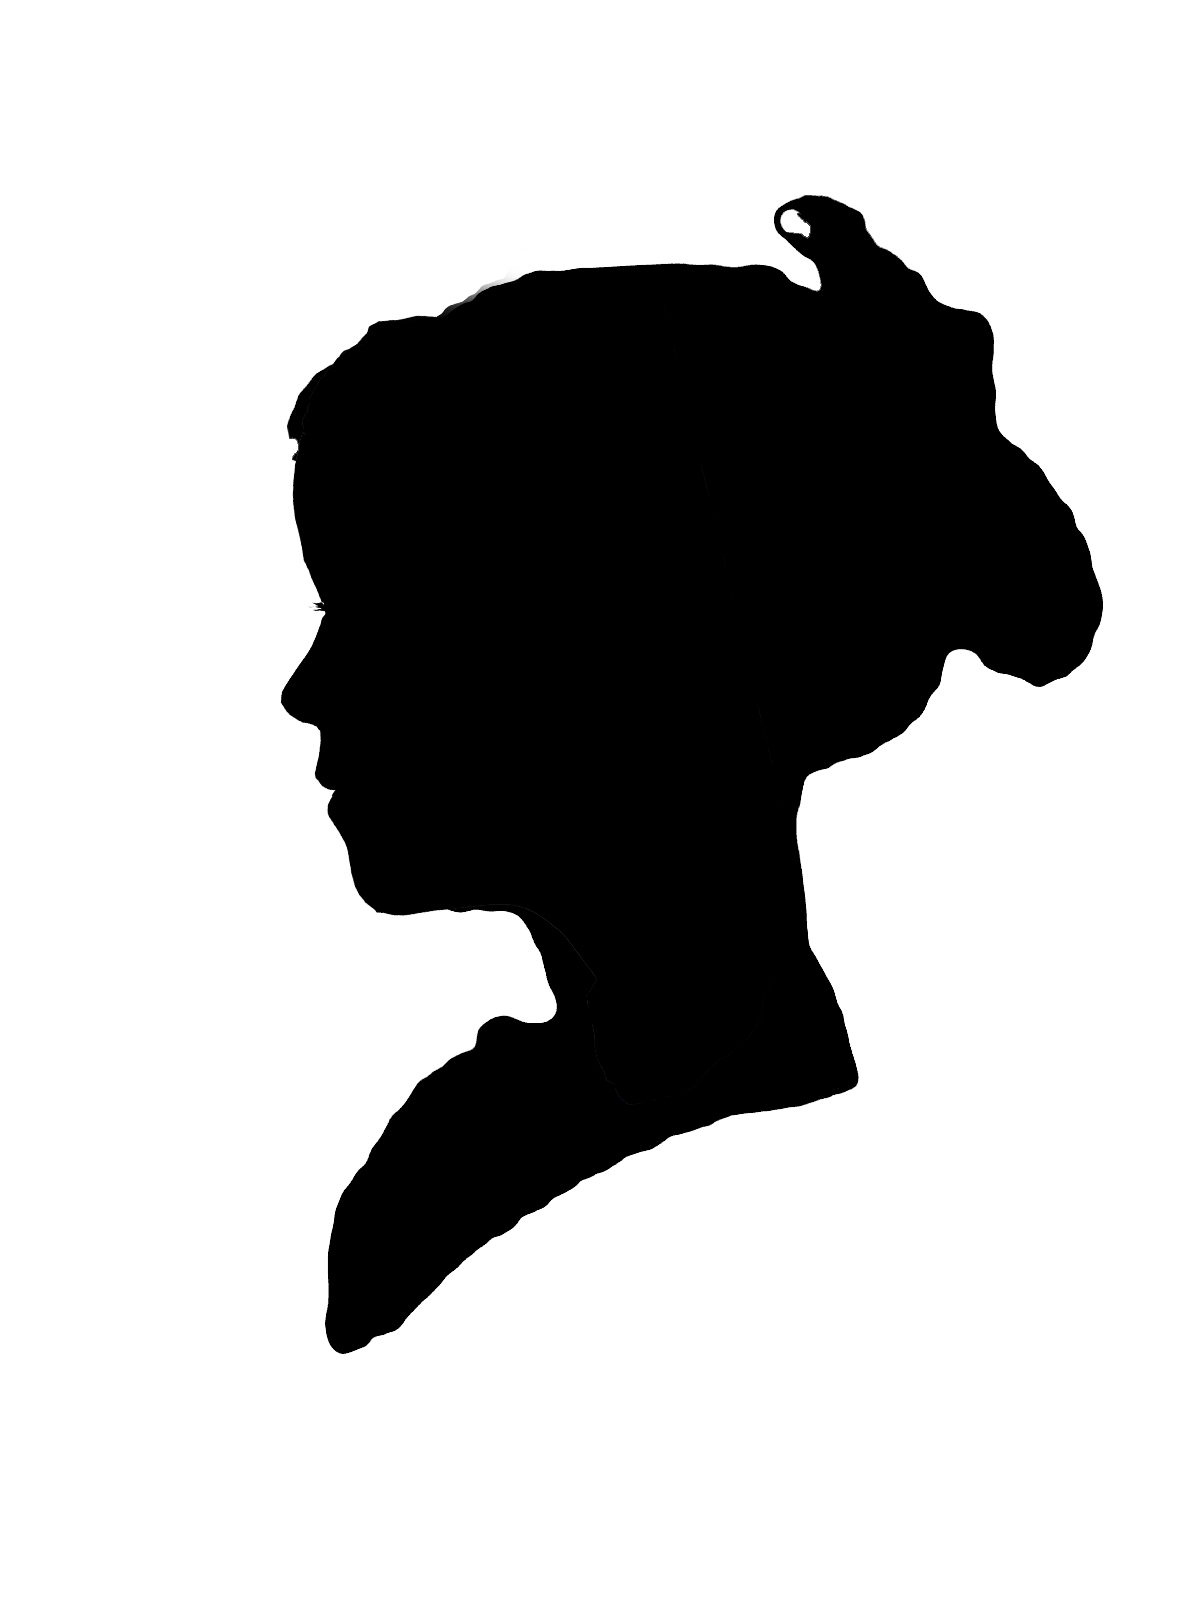 Woman Headshot Silhouette - Clipart library - Clipart library